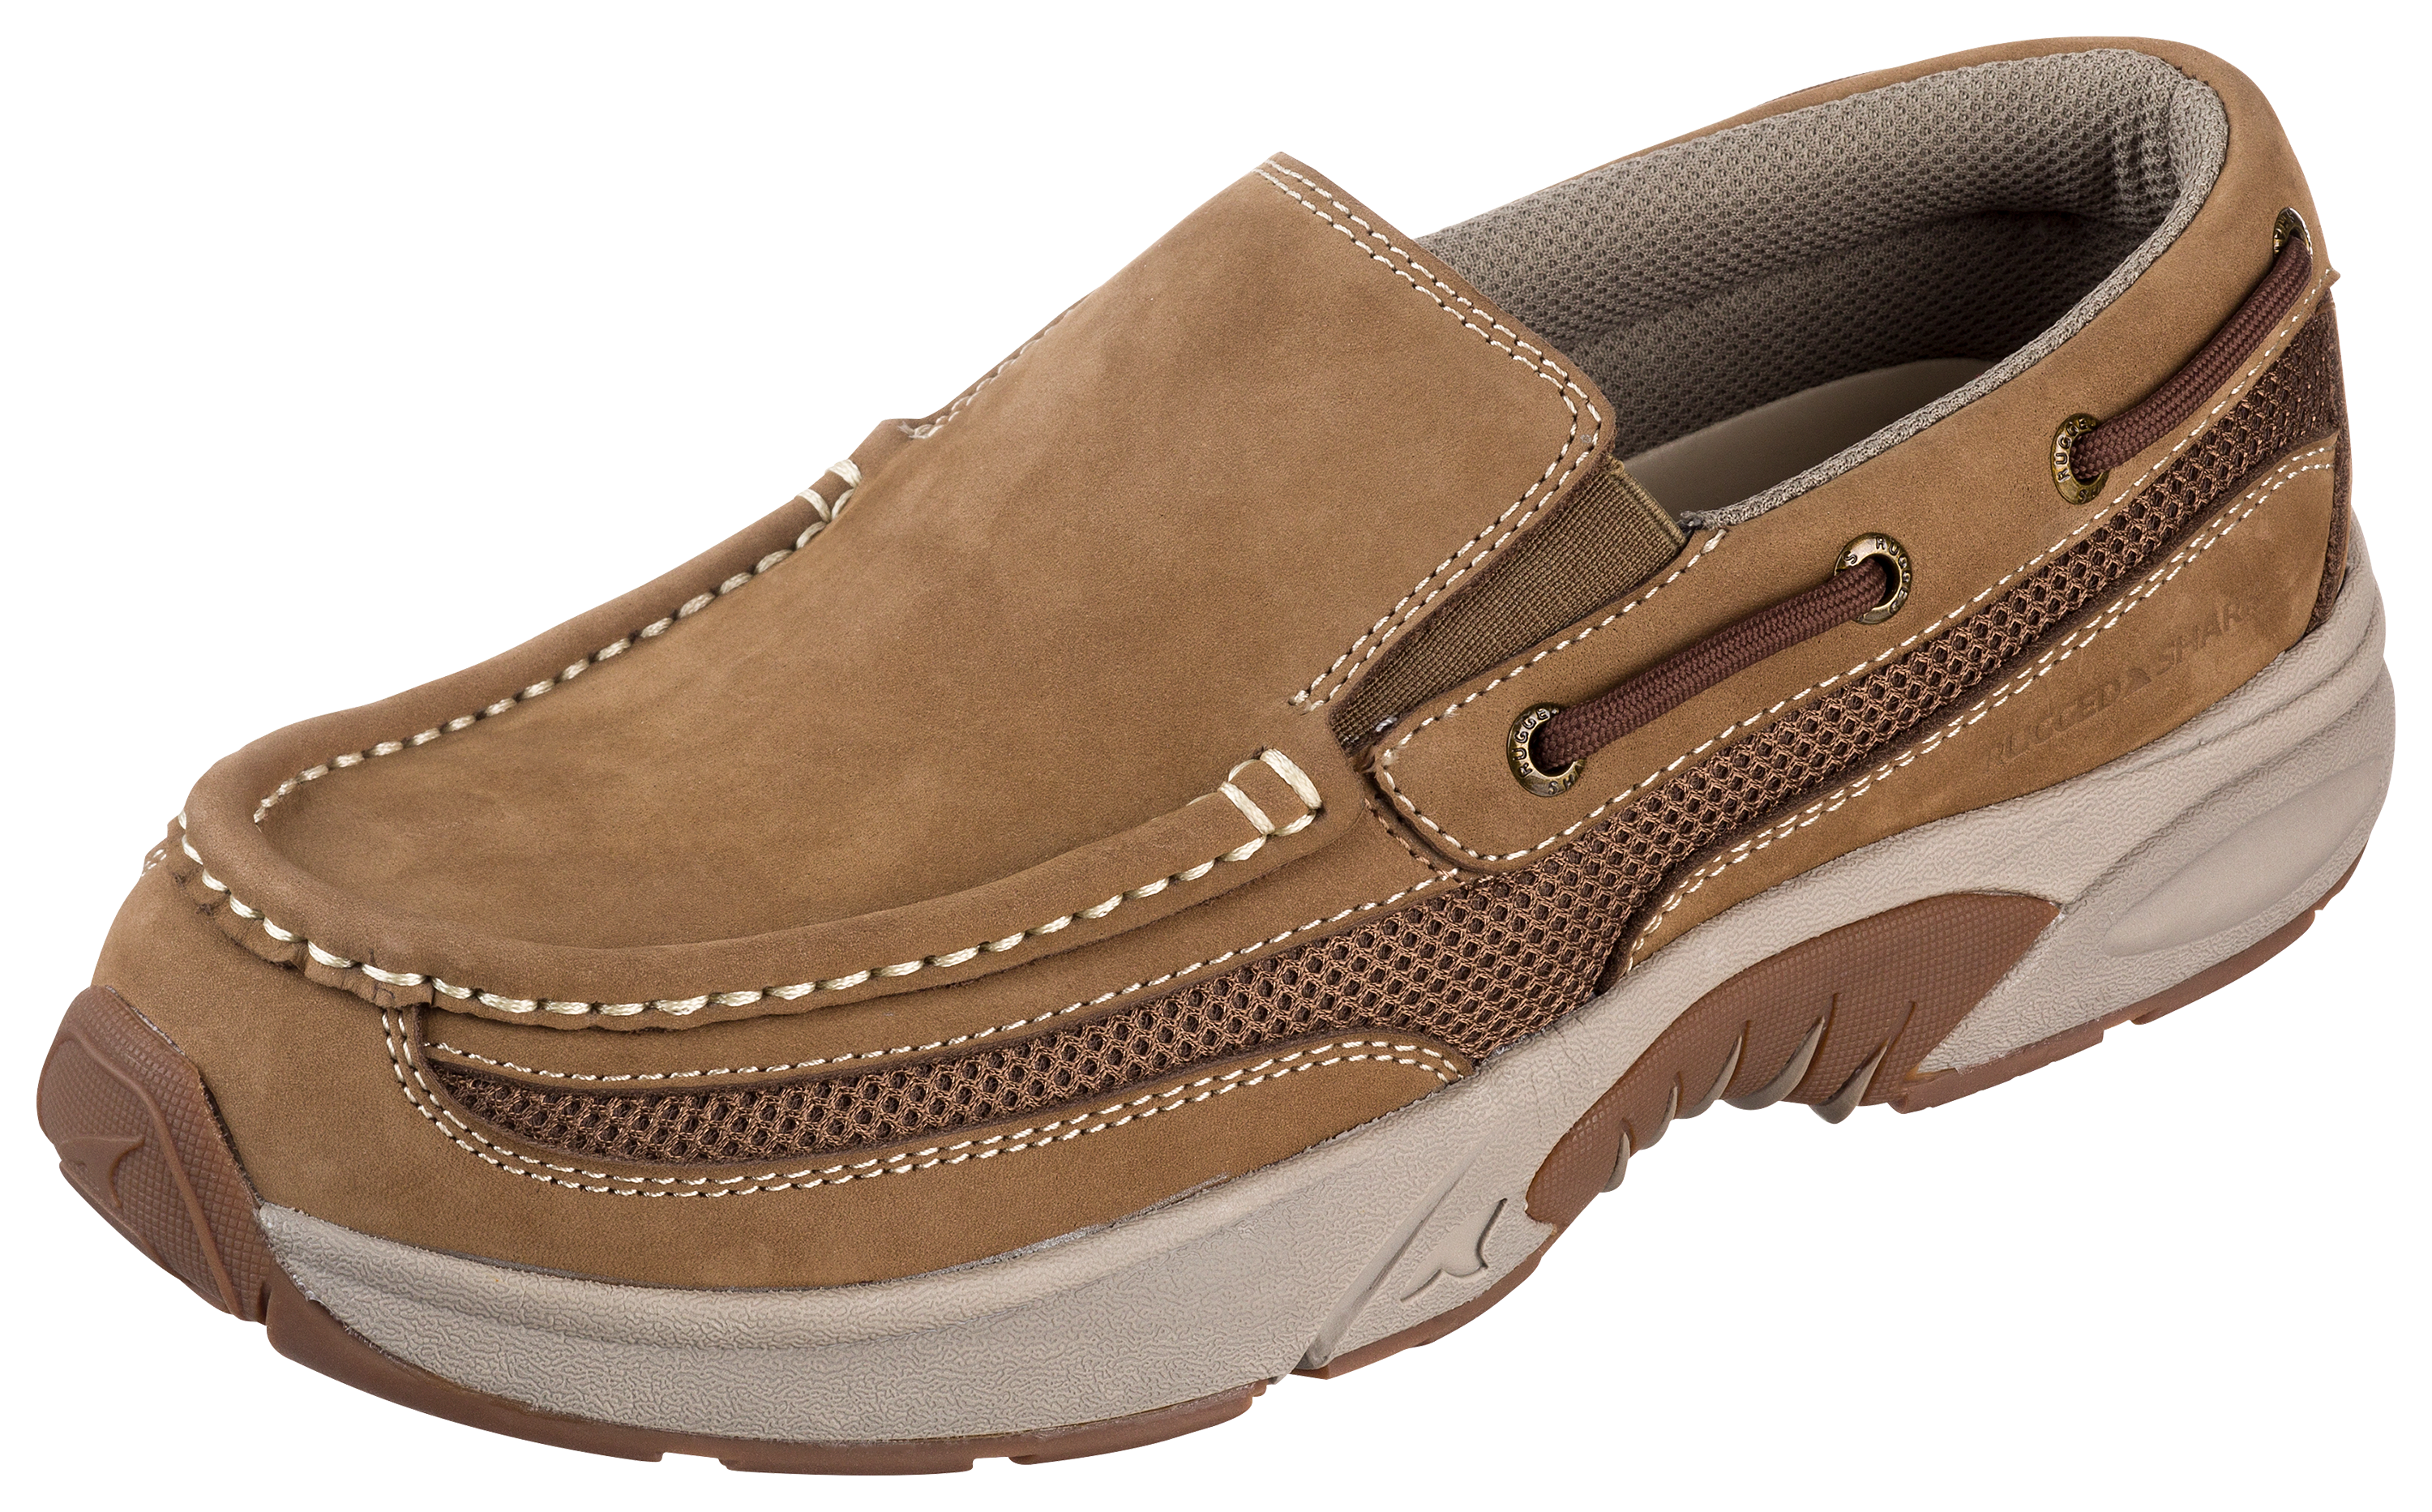 Rugged Shark Pacifico Slip On Shoes For Men Bass Pro S